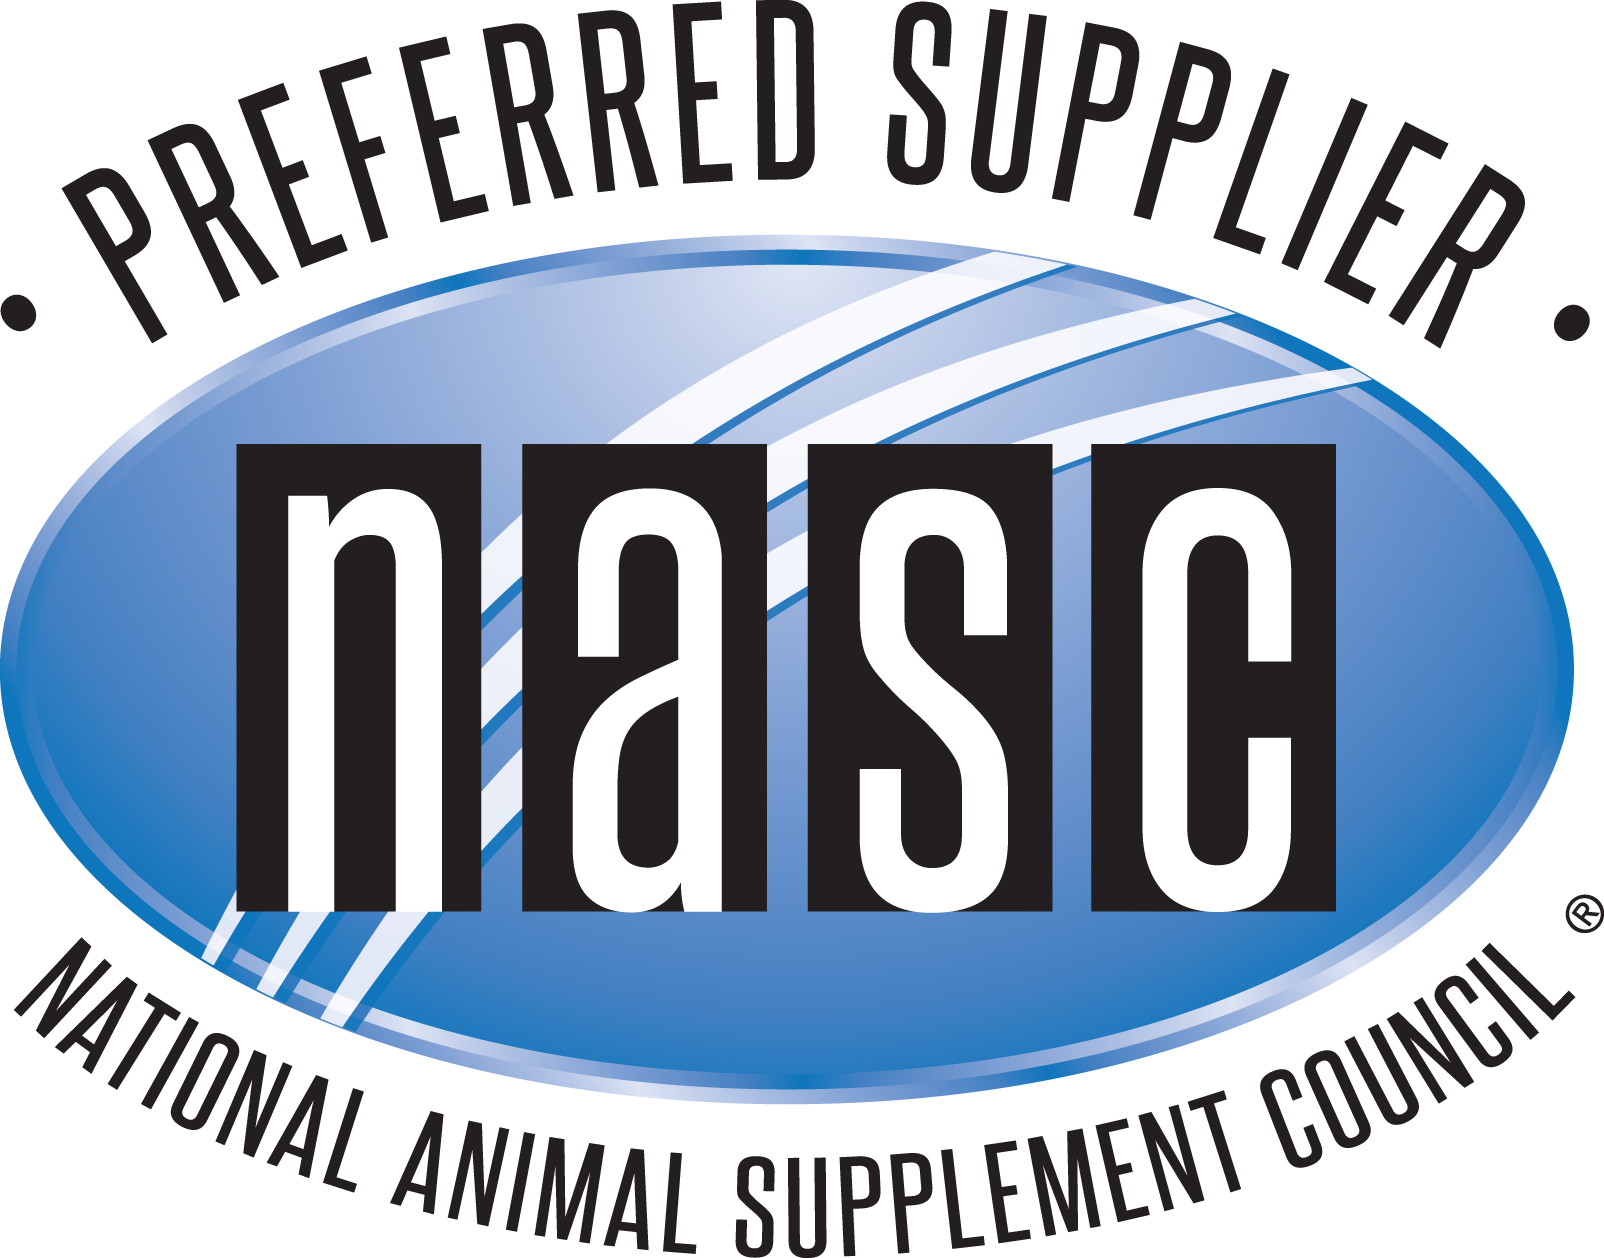 National Animal Supplement Council Preferred Supplier seal